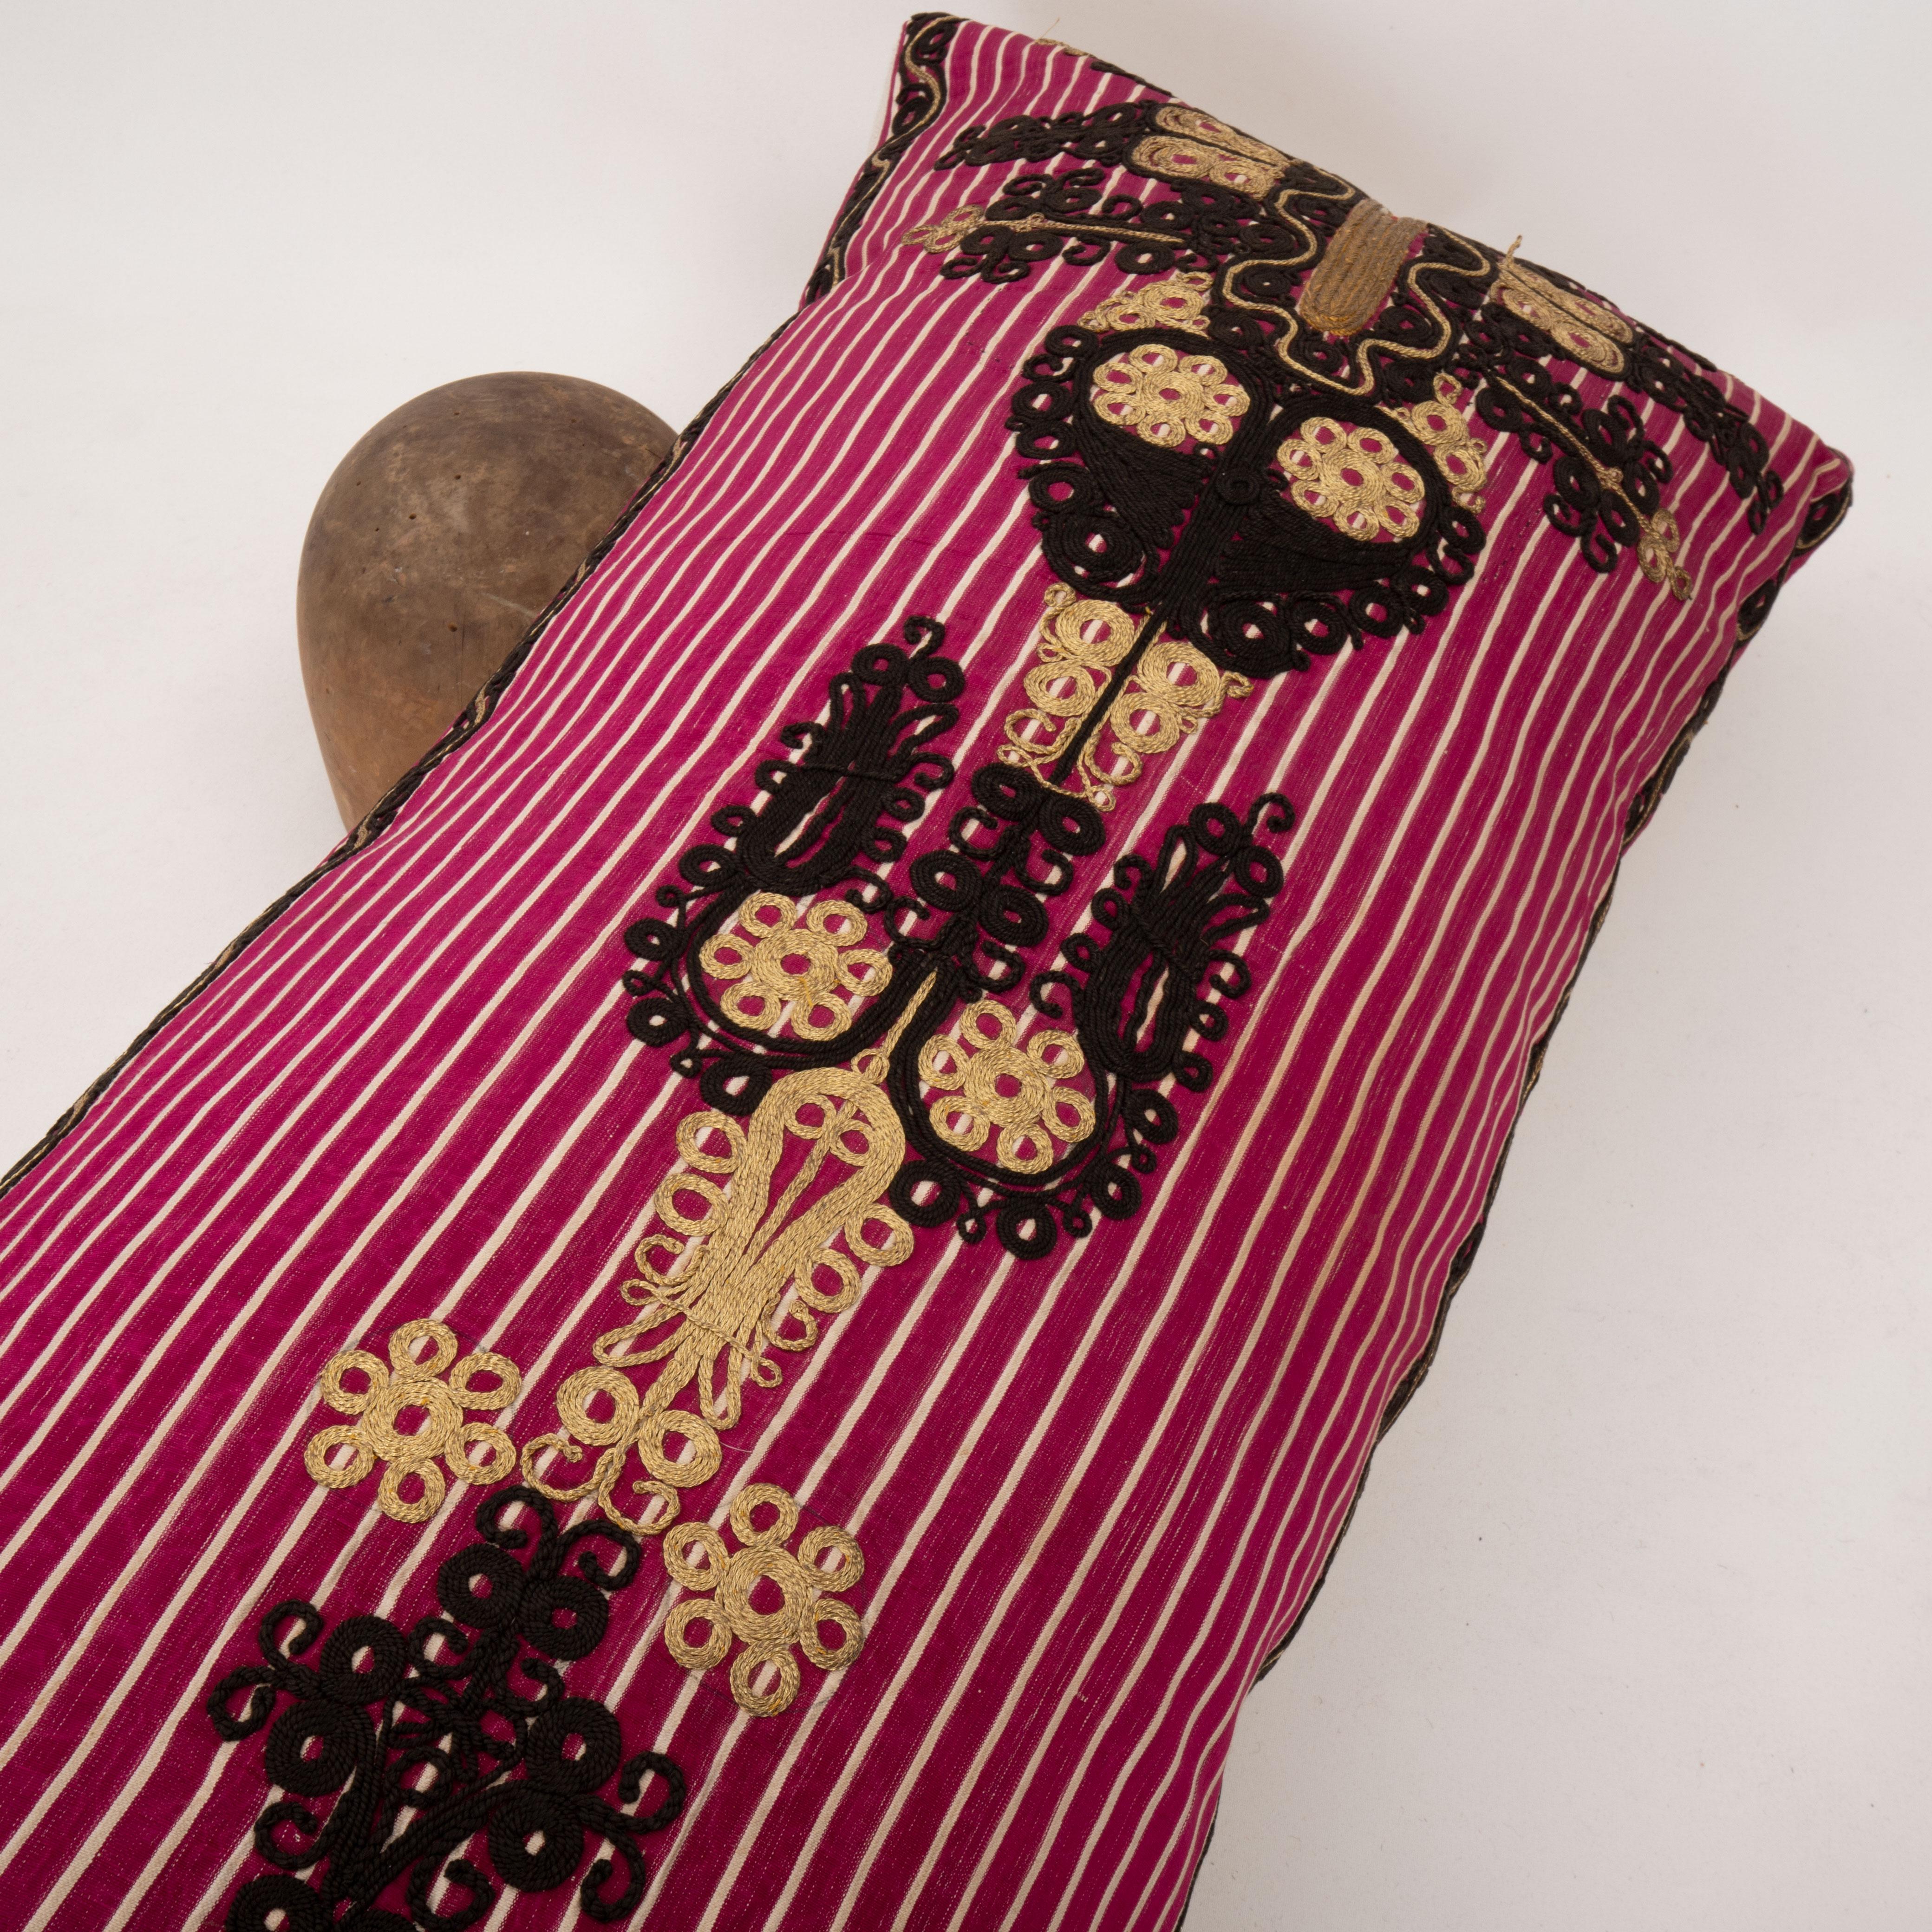 Silk Antique Ottoman Turkish Pillow Case, Early 20th C. For Sale